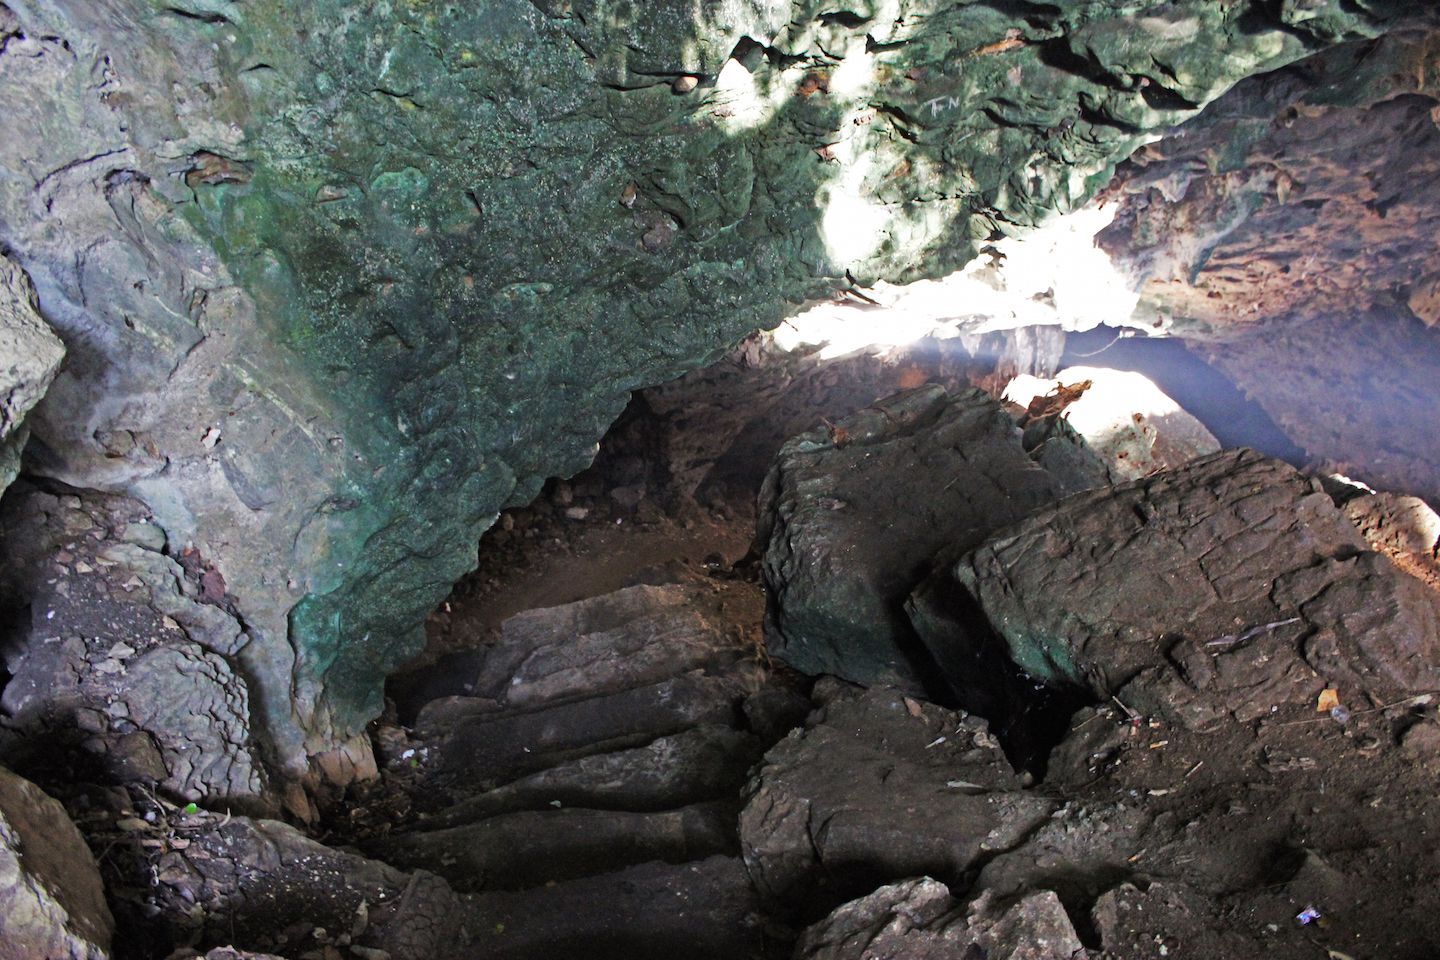 View of the darker parts of the cave